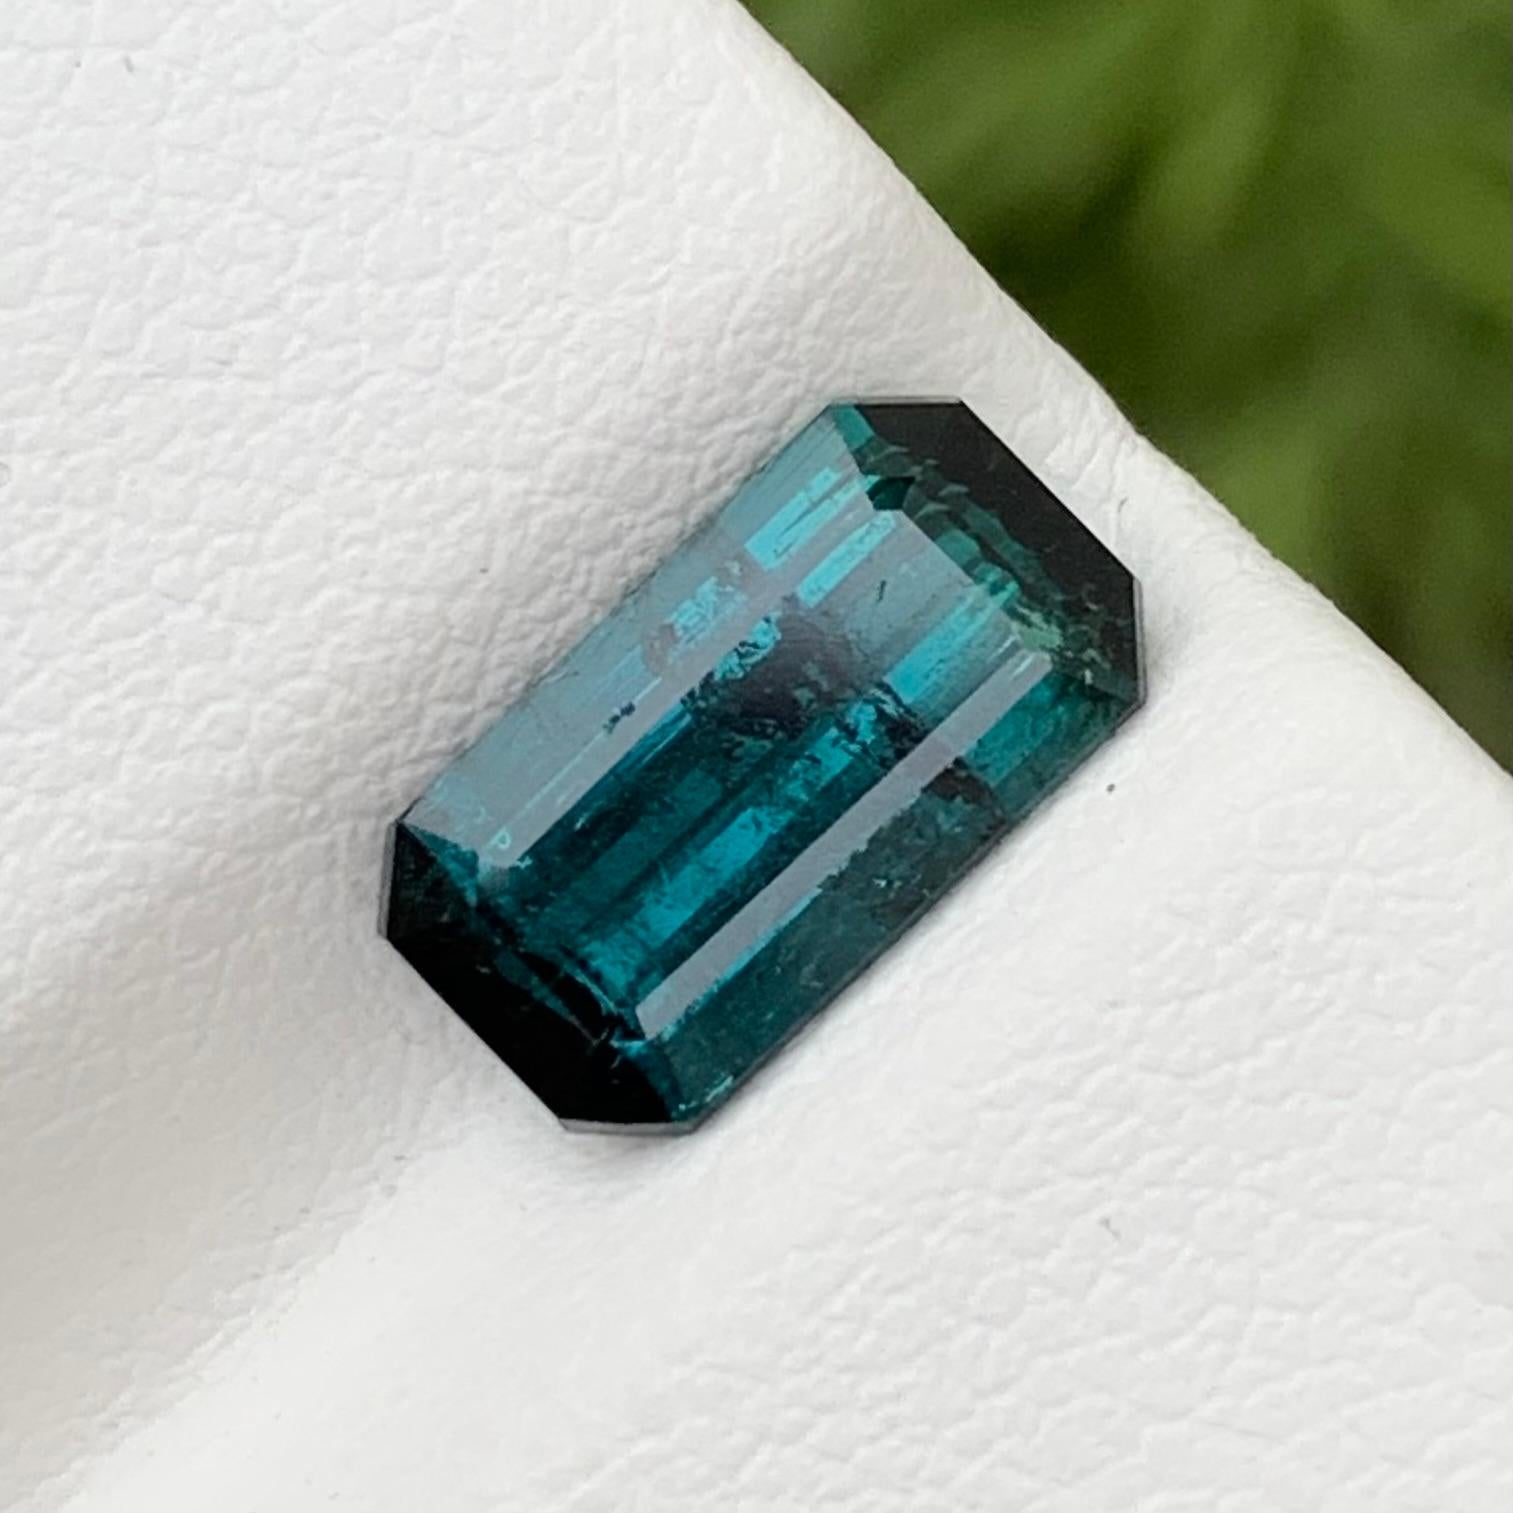 Loose Indicolite Tourmaline 
Weight: 2.05 Carats 
Dimension: 10.3 x 5.7 x 4 Mm
Origin: Afghanistan 
Colour: Blue 
Treatment: Non 
Certificate: On Demand 
Clarity : Included 
Shape: Emerald 

Indicolite tourmaline, also known simply as indicolite, is